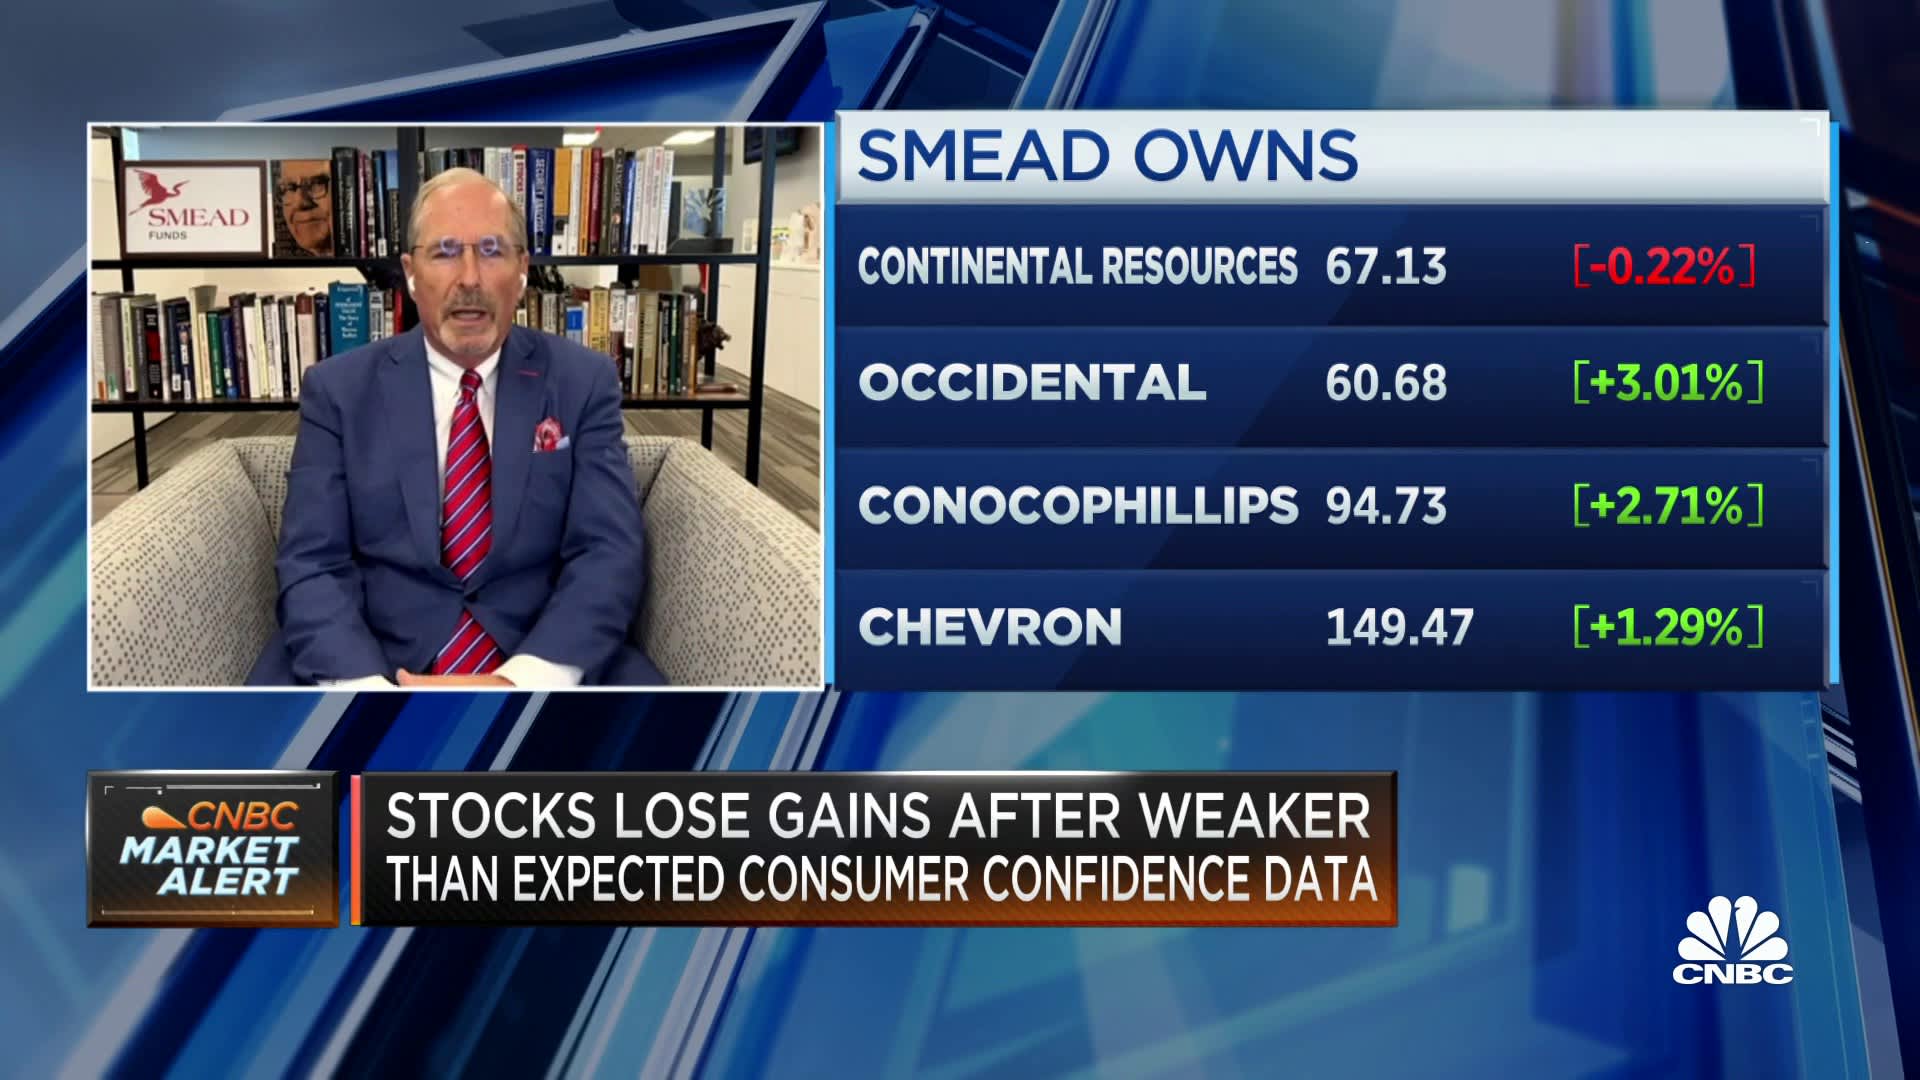 Watch CNBC’s full interview with Smead Value Fund's Bill Smead